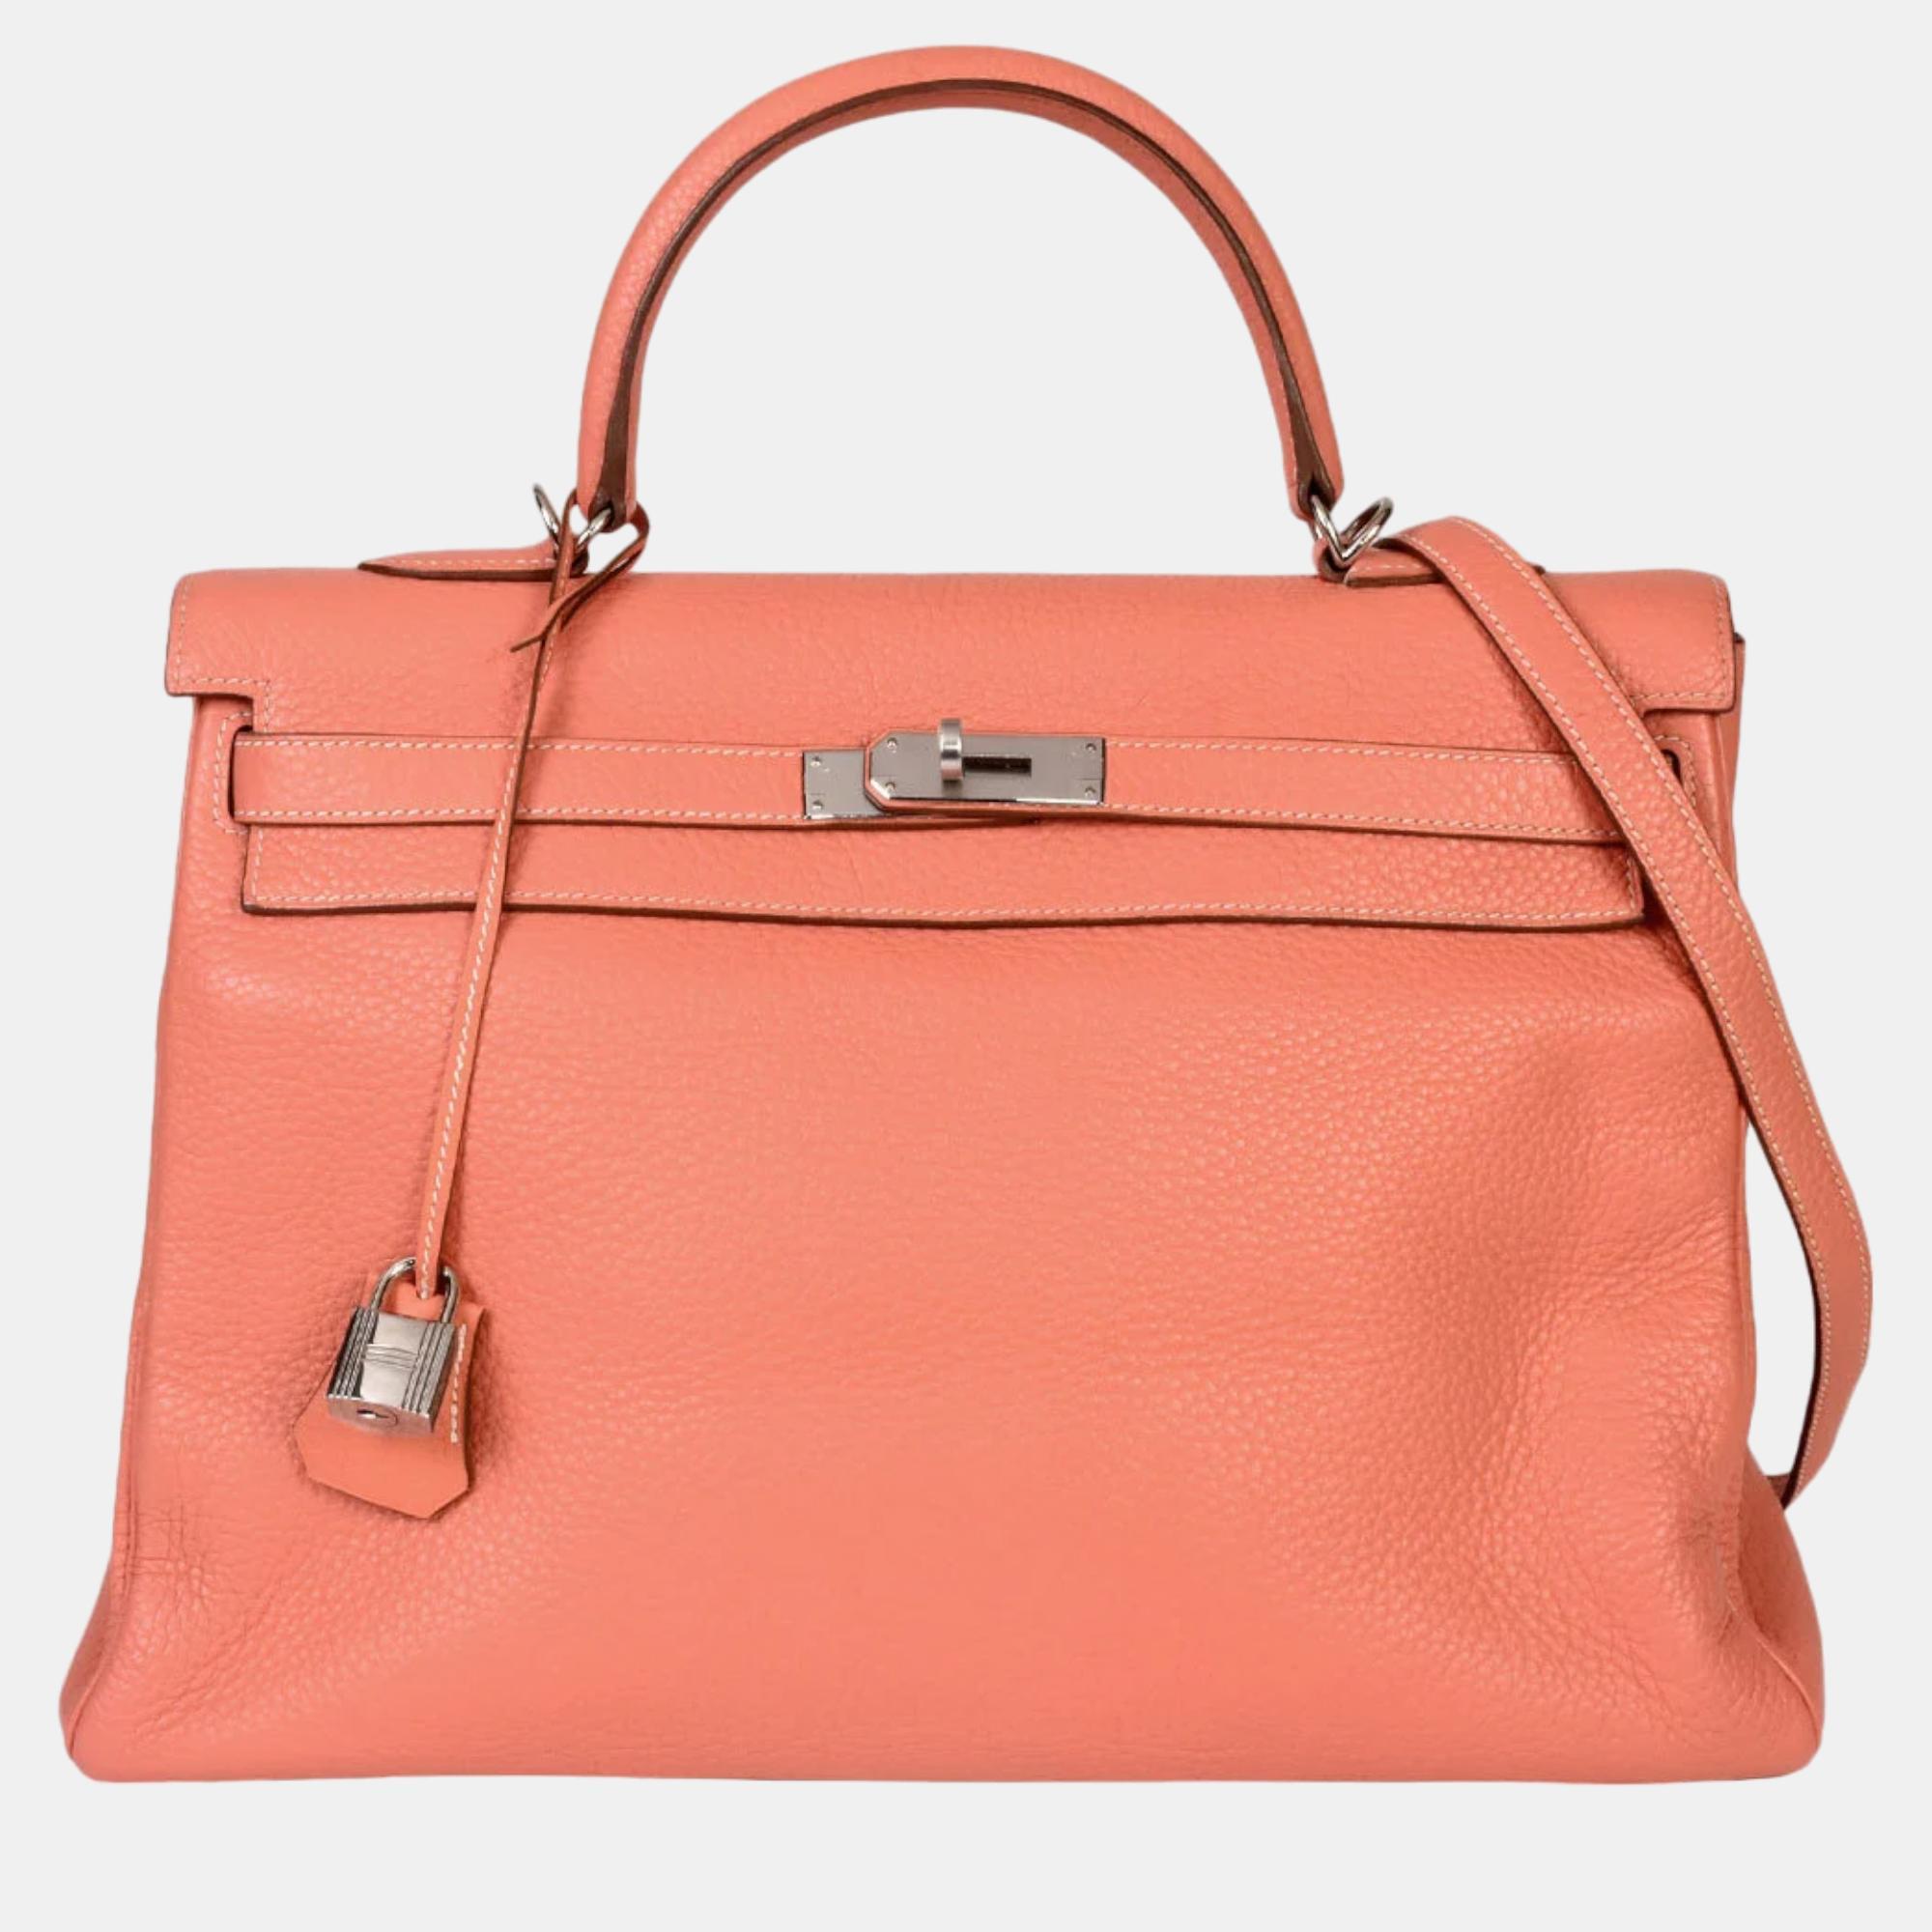 

HERMES Kelly 35 Inner stitching Q stamp (manufactured in 2013) Flamingo Taurillon Clemence Handbag with shoulder strap, Pink